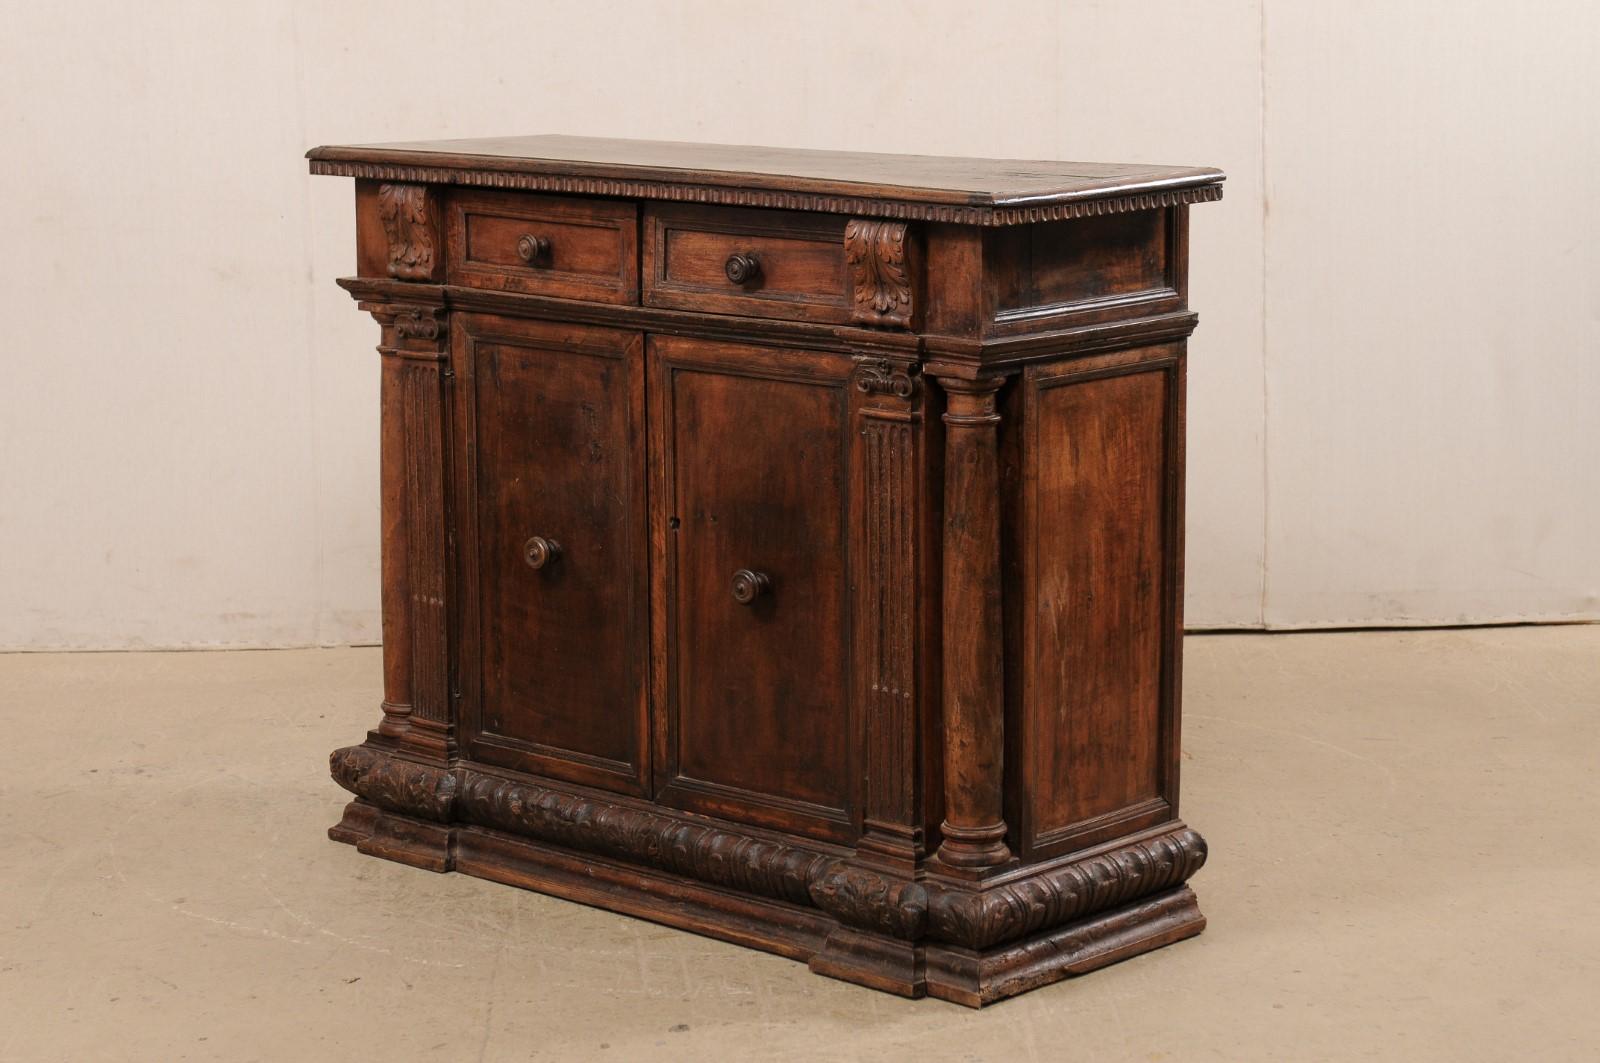 Italian Early 19th C. Walnut Cabinet with Carved Column & Pilaster Accents For Sale 6